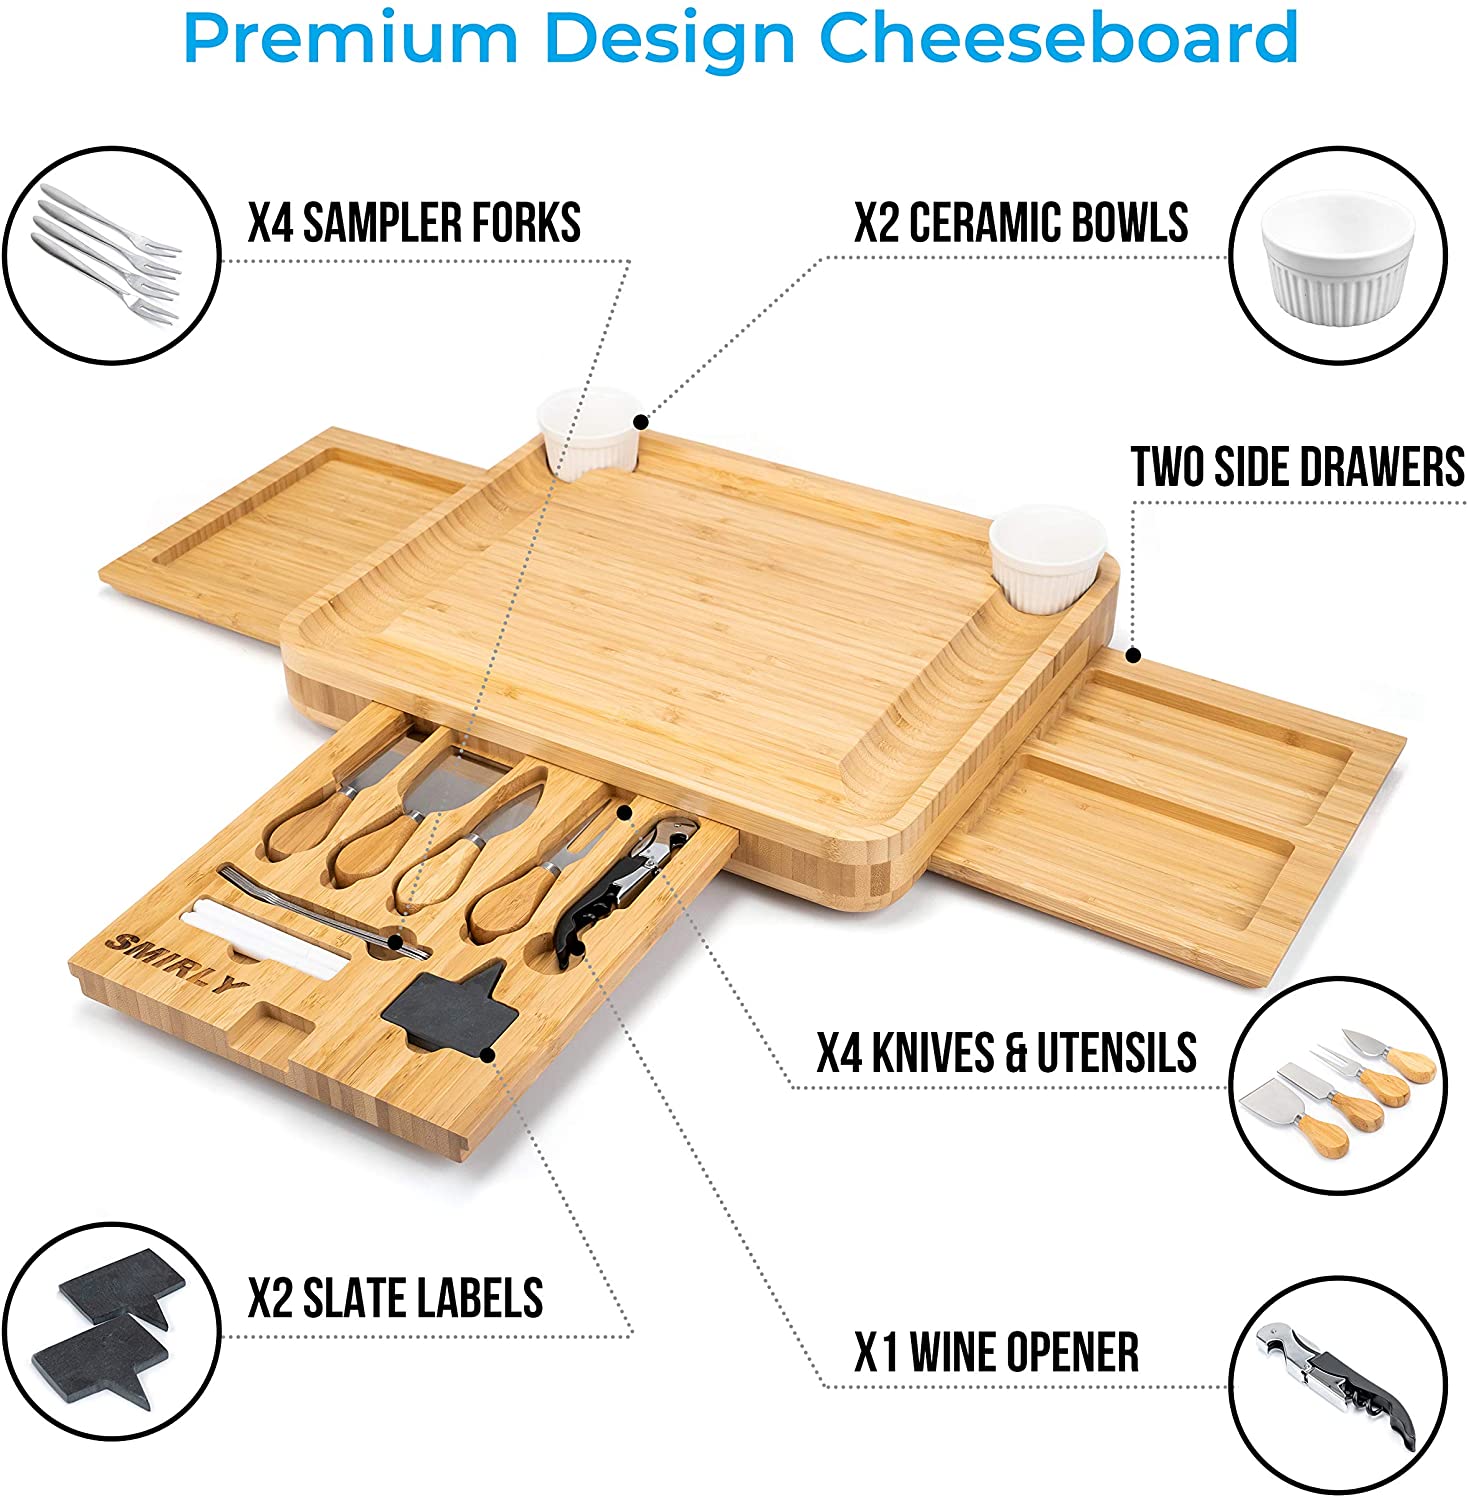 Smirly Cheese Board and Knife Set: 13 x 13 x 2 Inch Wood